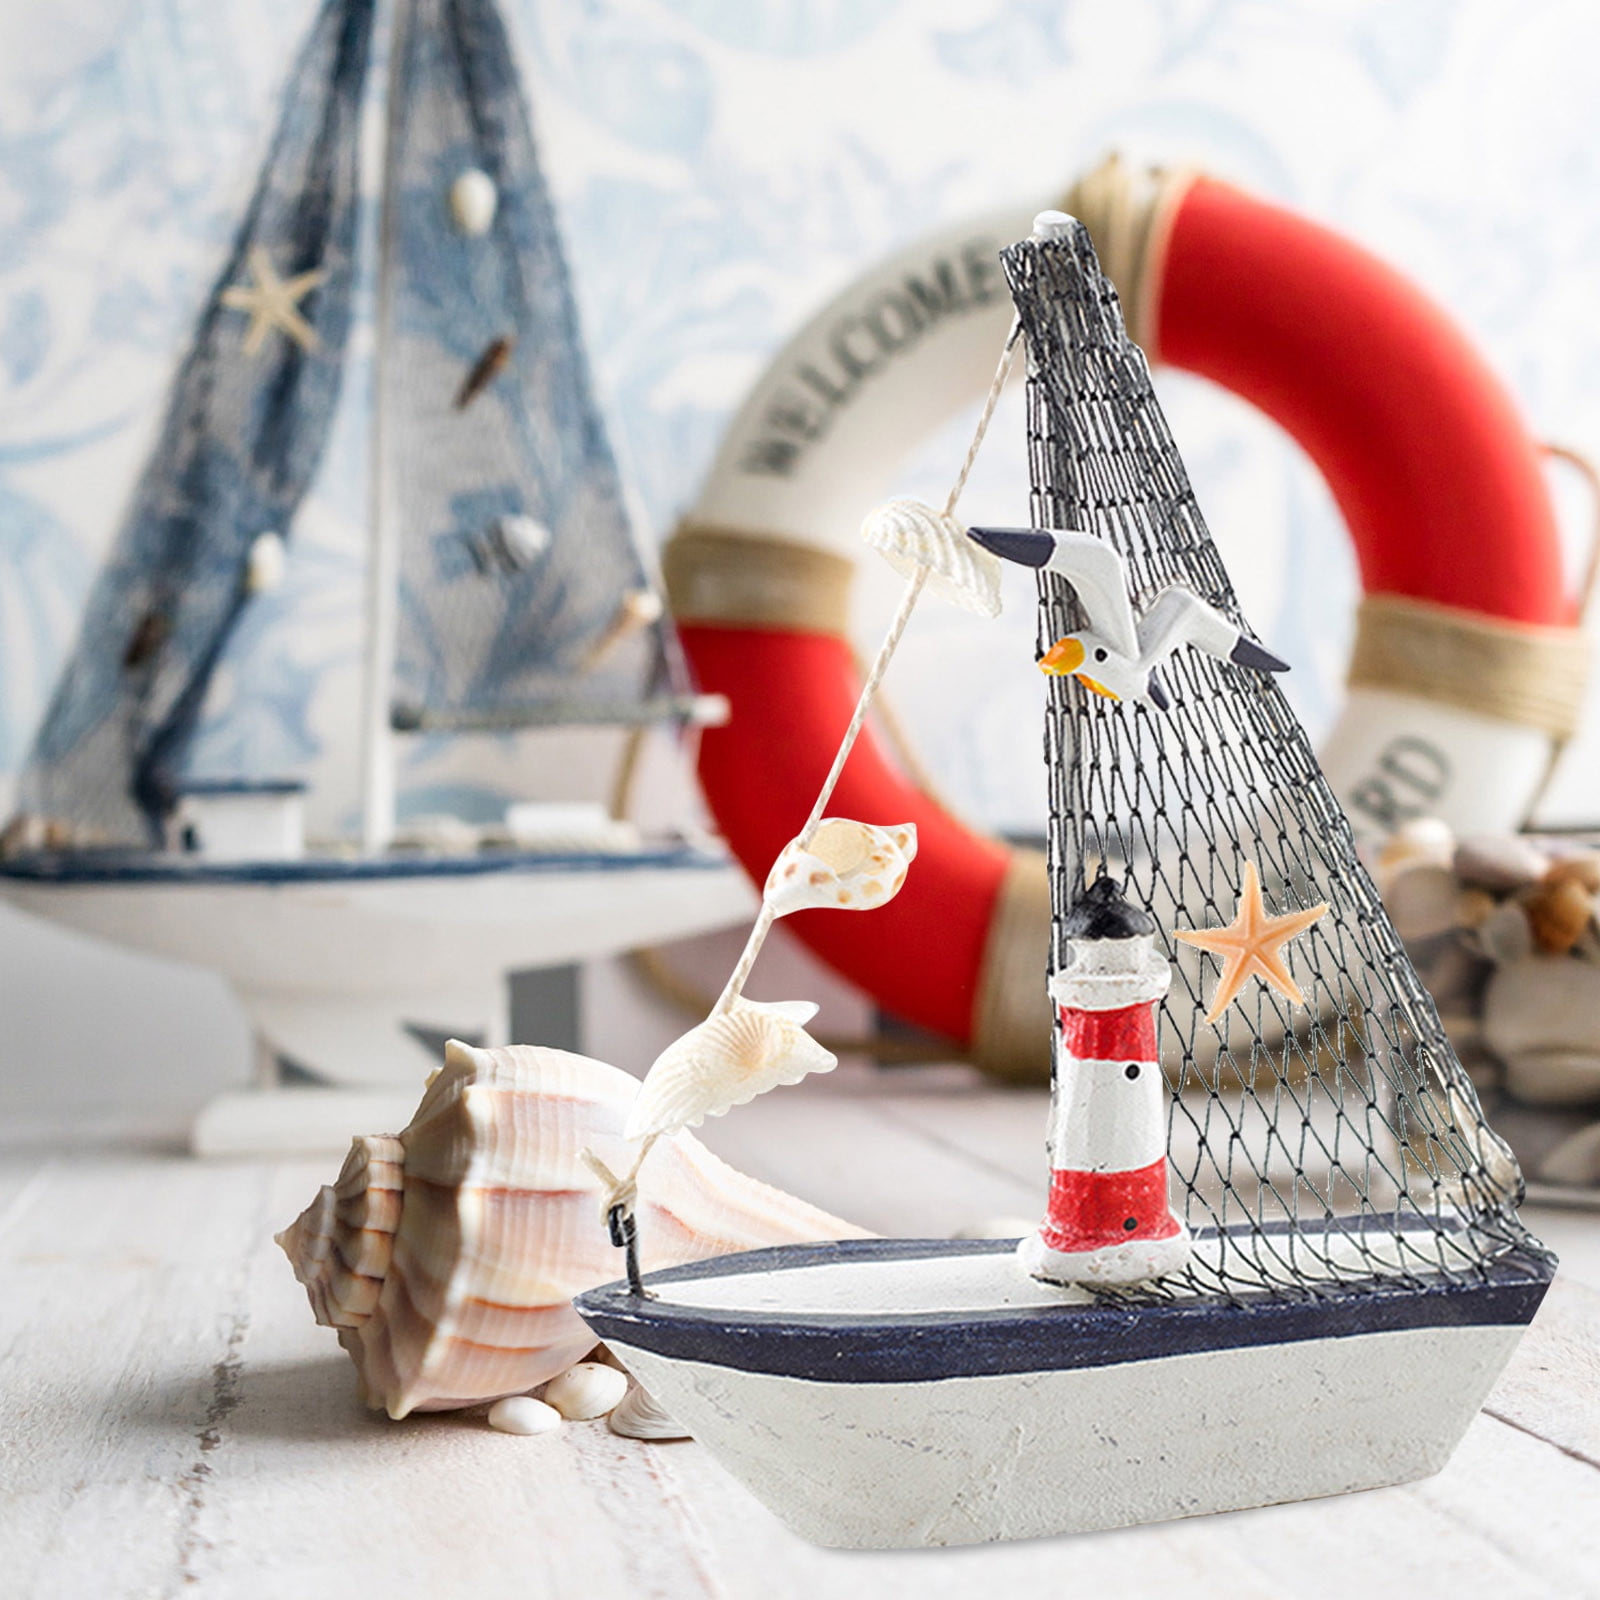 Wiueurtly Party Decorations,Home Nautical Wooden Sailboat Ornament Beach  Decoration Retro Kitchen Bathroom Office Party Center